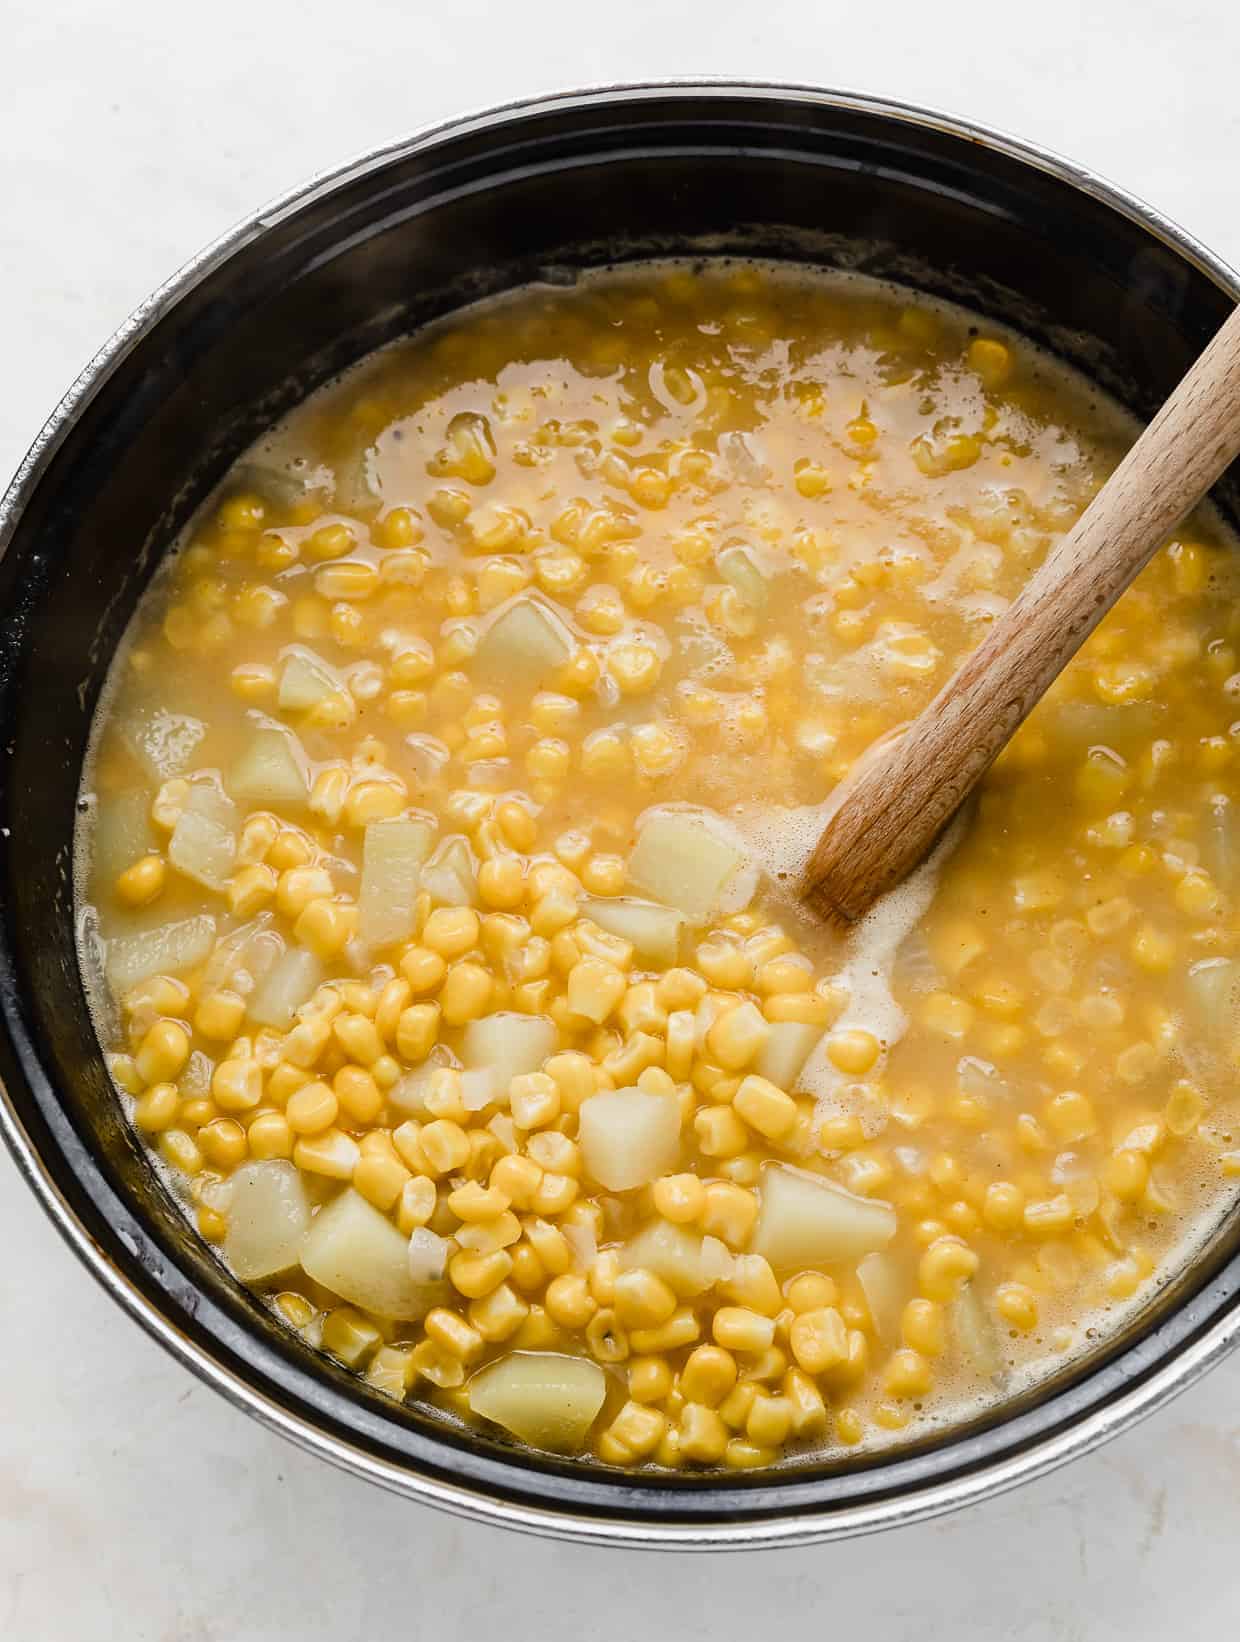 A wooden spoon stirring a large pot full of cooked corn and diced potatoes.